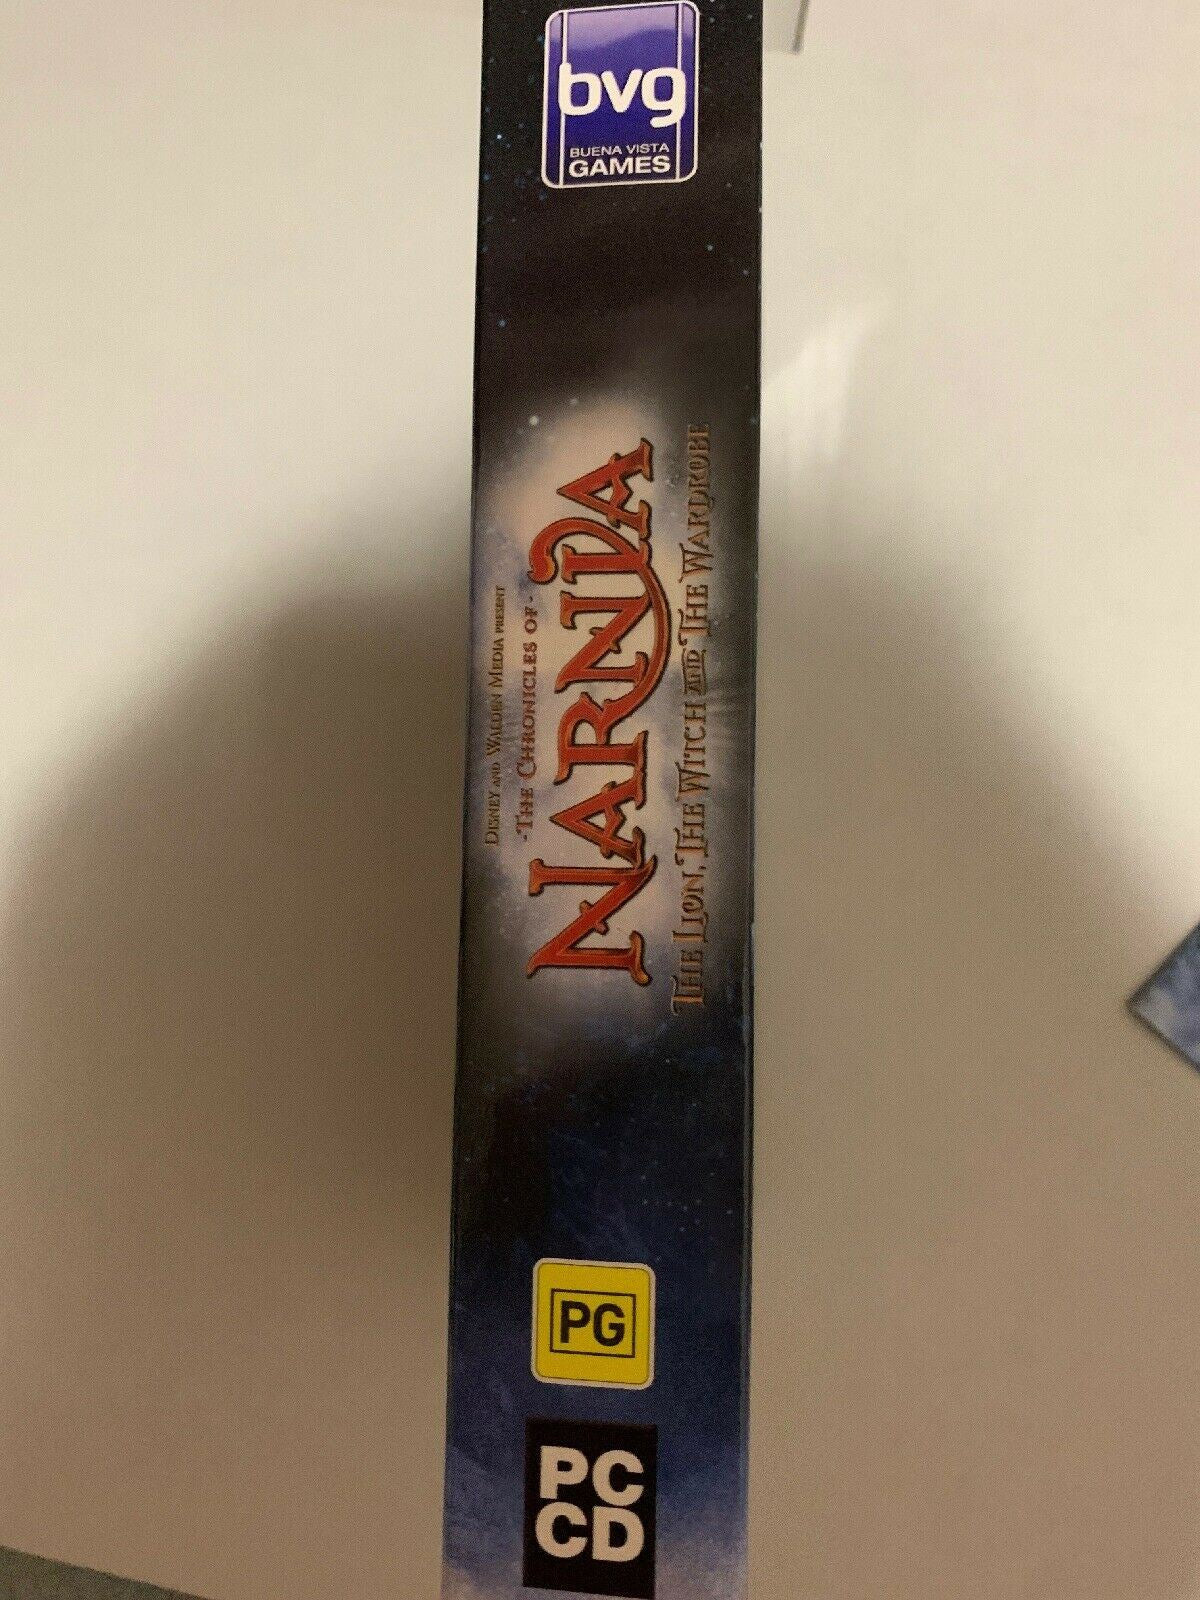 Chronicles of Narnia: Lion Witch Wardrobe - PC Windows Game (2005) With Manual